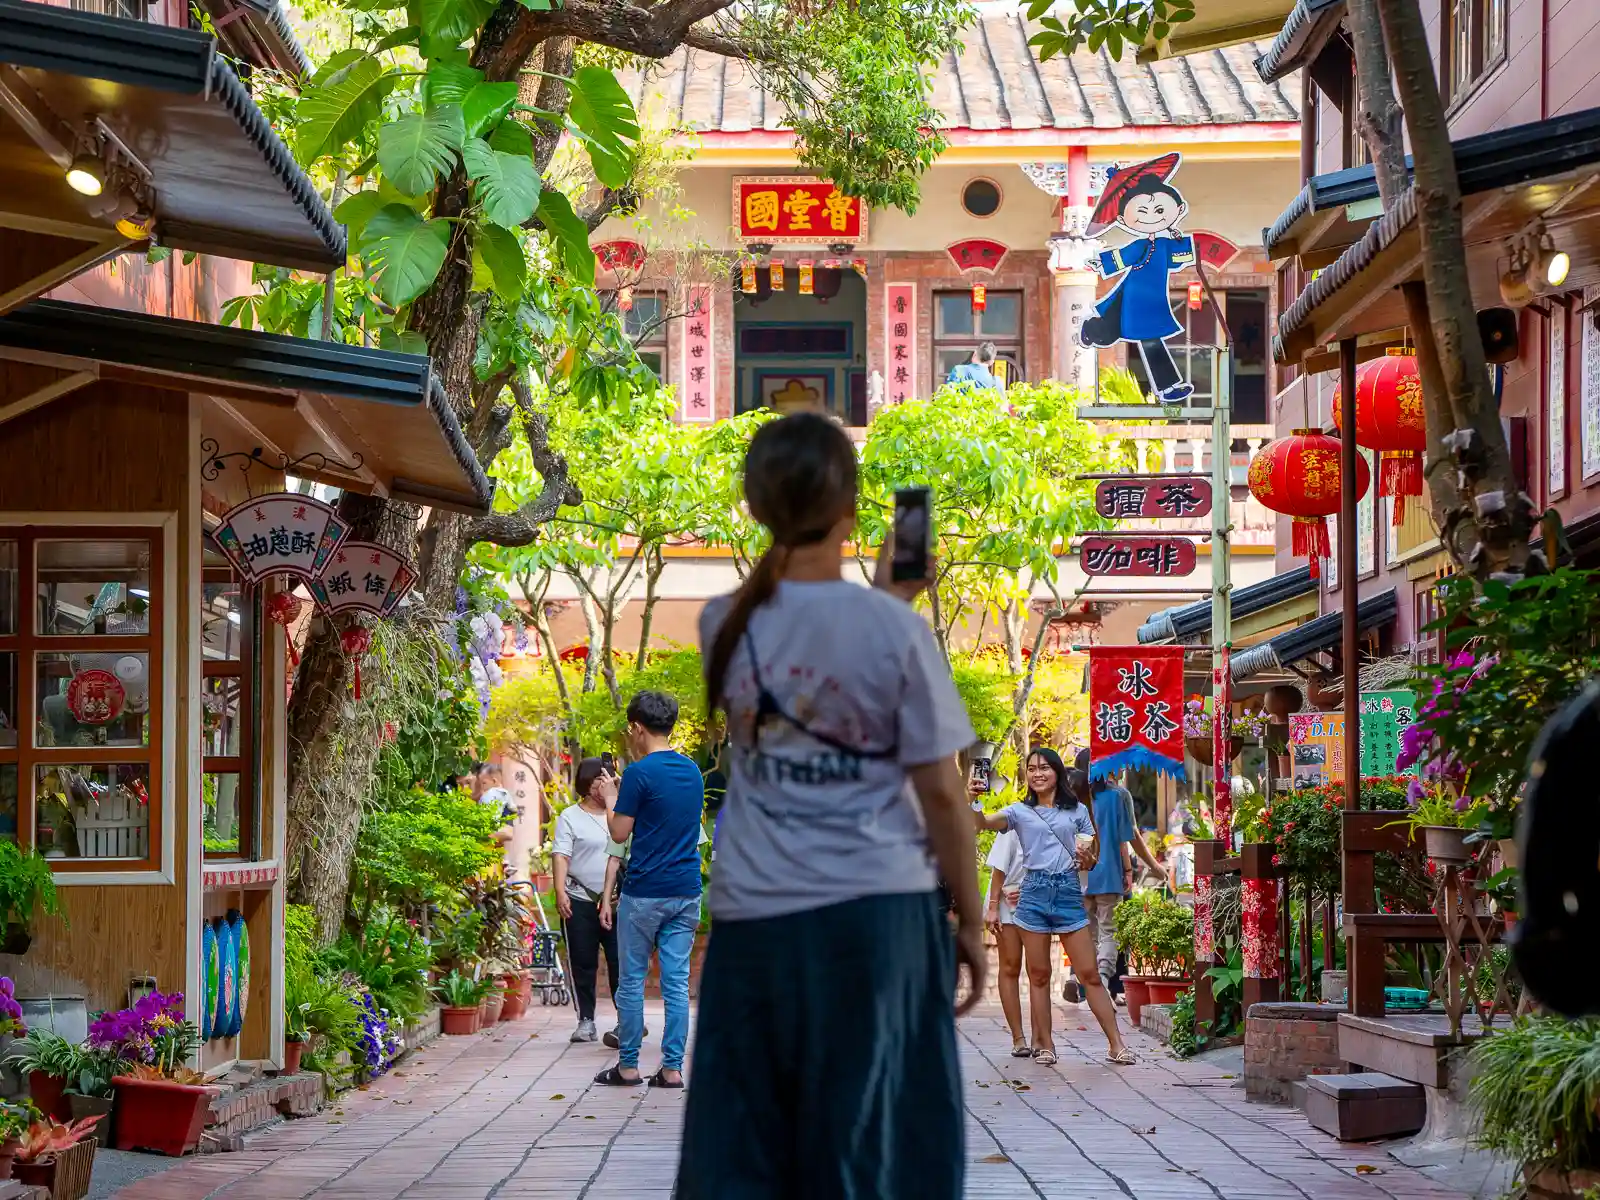 A tourist takes a photo of the shops on Meinong Folk Villages lush main walkway.